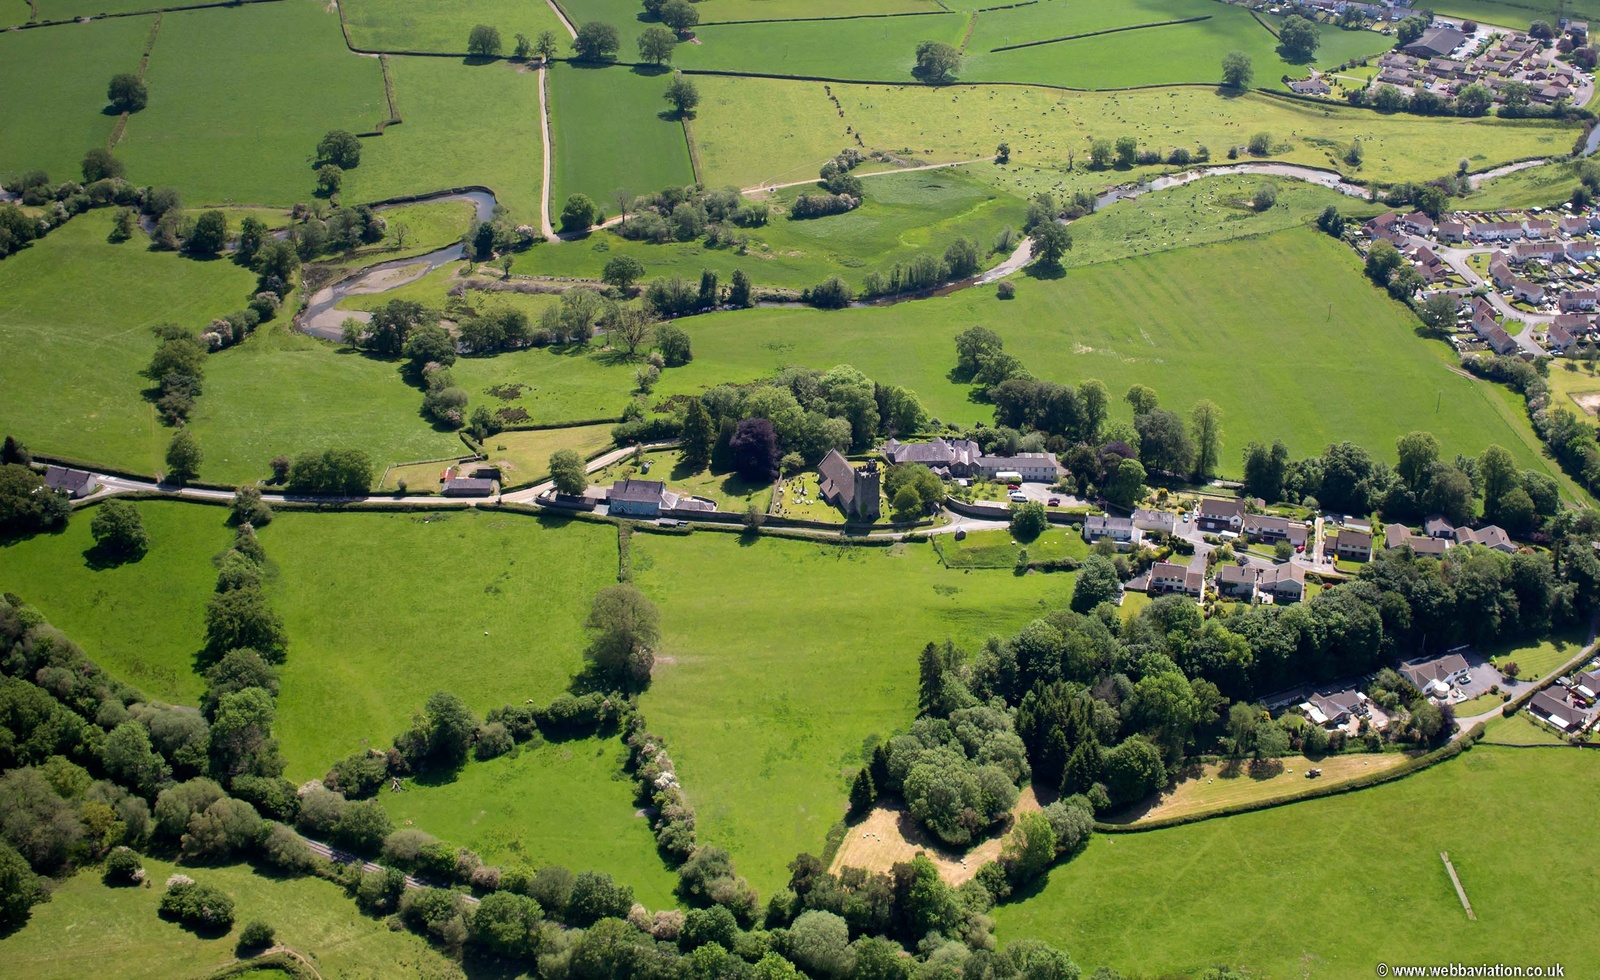 Llandovery Roman fort from the air